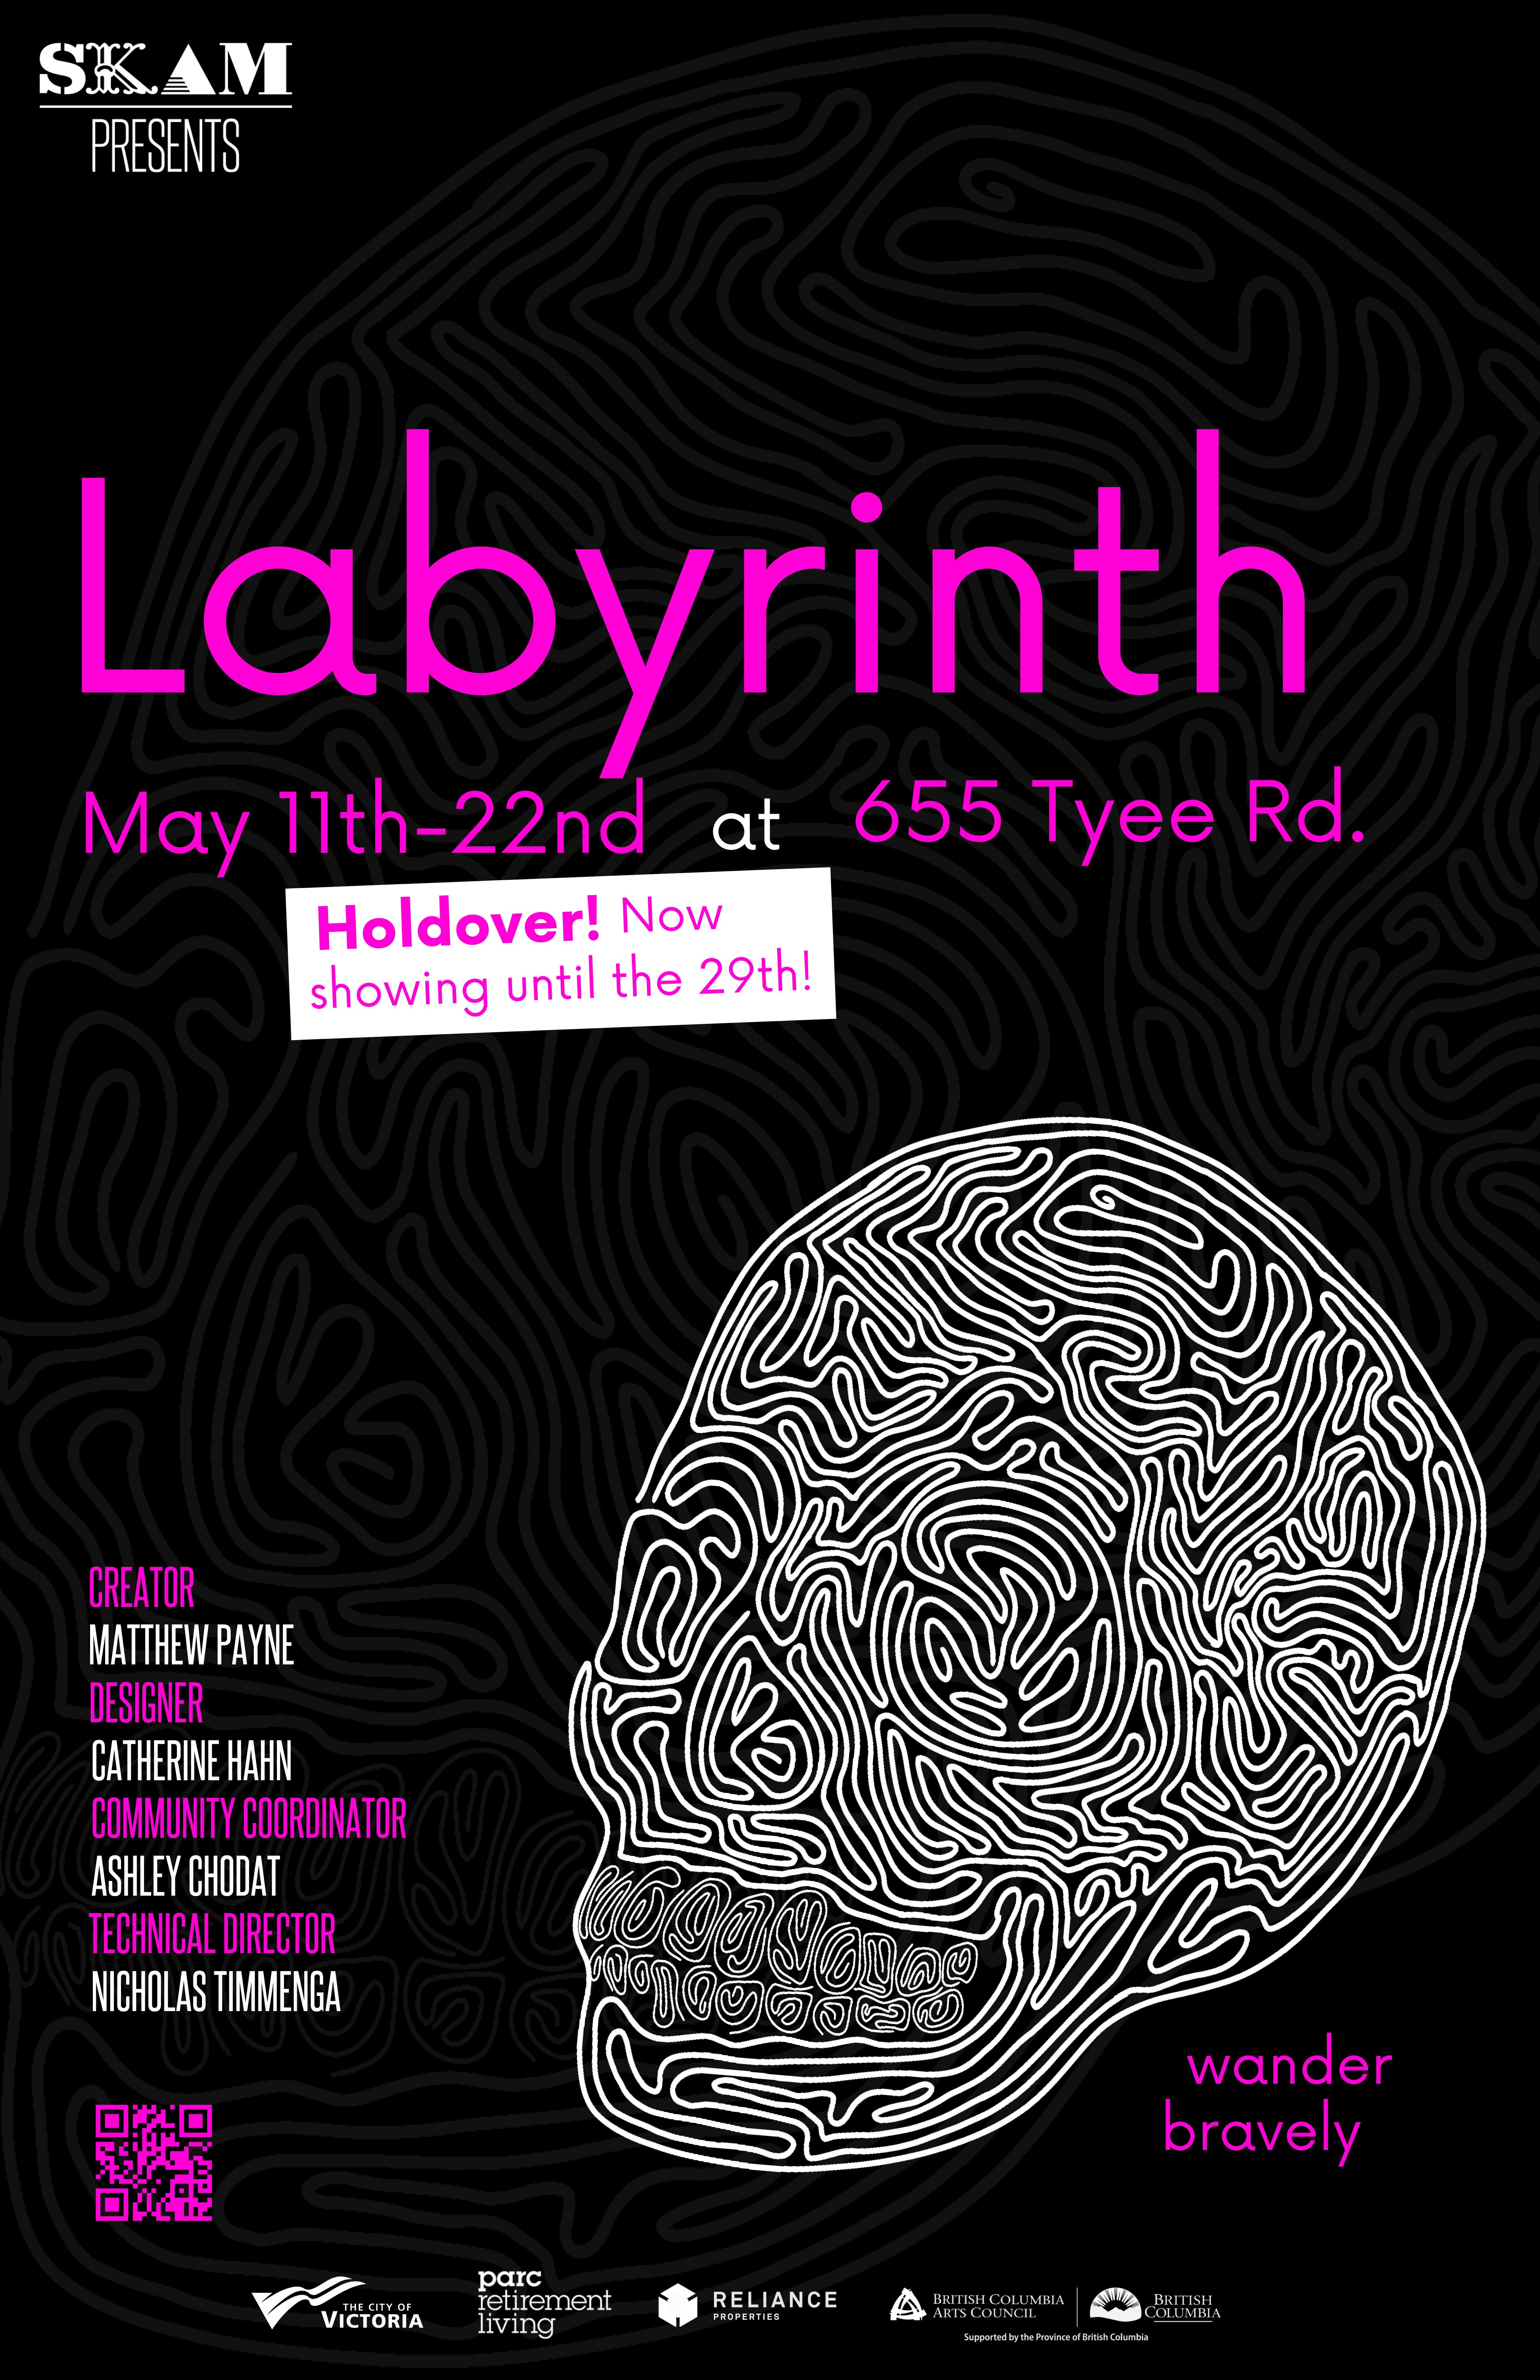 Labyrinth Poster--now a holdover until the 29th